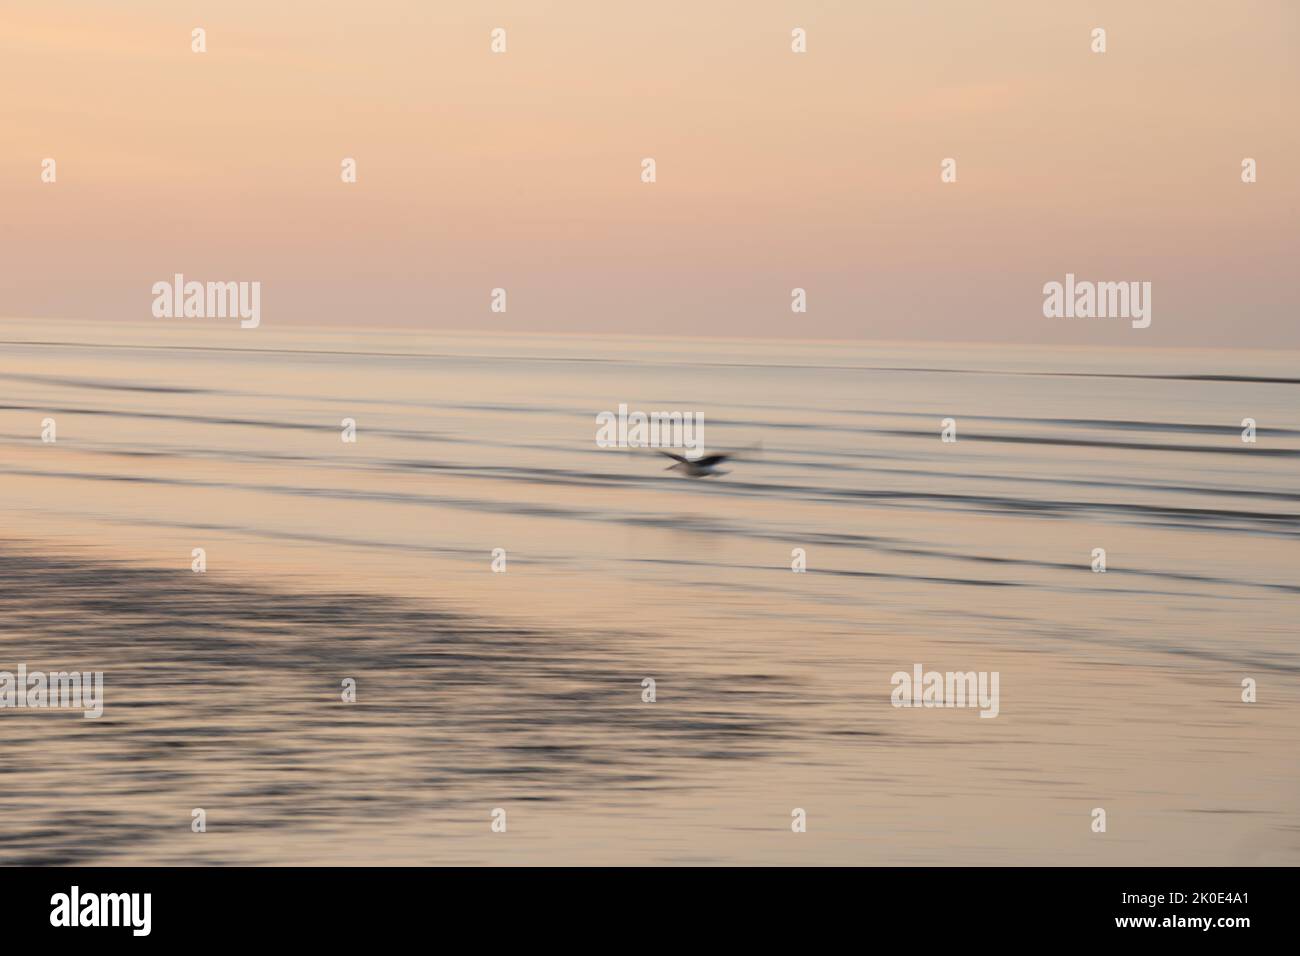 ICM Intentional Camera Movement image of bird flying over the ocean at sunrise in Sussex, England Stock Photo